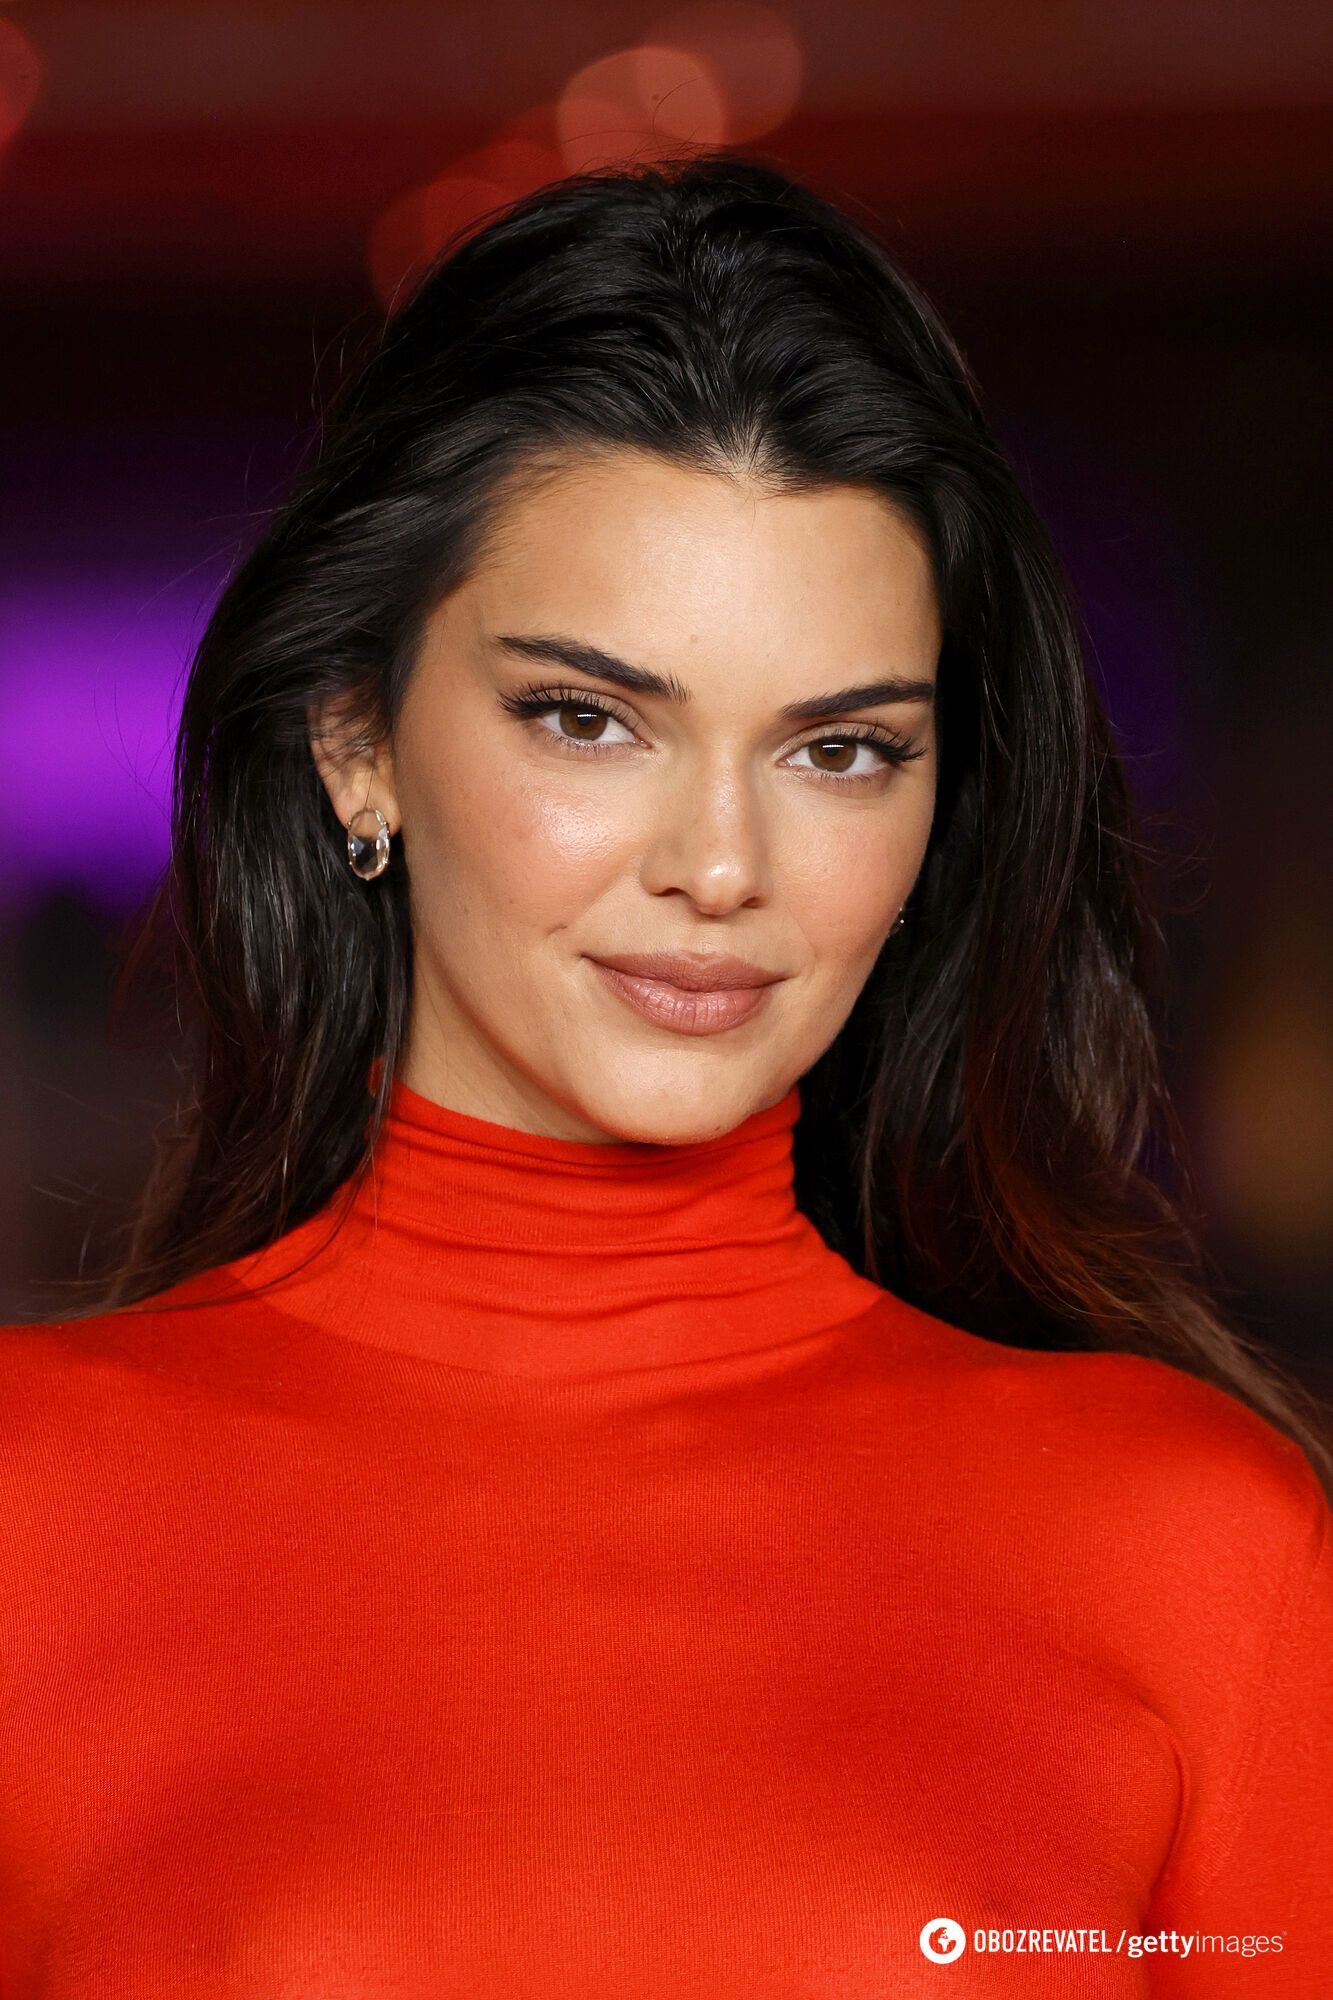 Kendall Jenner with a simple but voluminous hairstyle